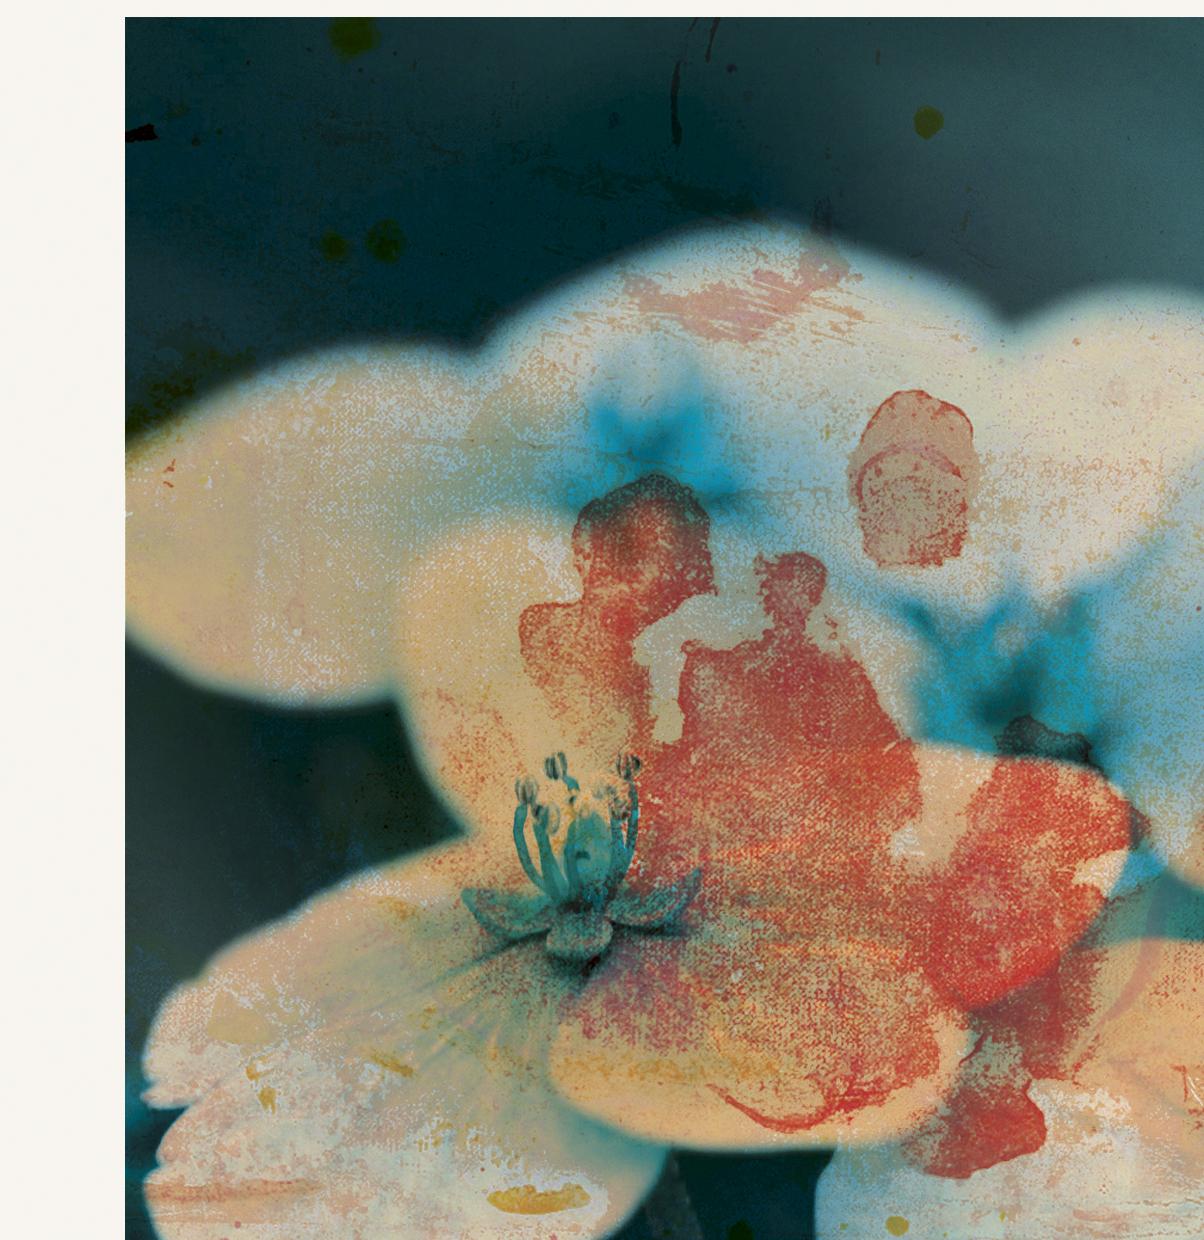 Flowers 19

Digital pigment print Ultrachrome ink on Fabriano Rosaspina paper. Hand signed by the artist, and certificate of authenticity.  (Unframed)

His work has been shown in Reina Sofía Museum of Madrid, Royal Academy of London, Arco Madrid,